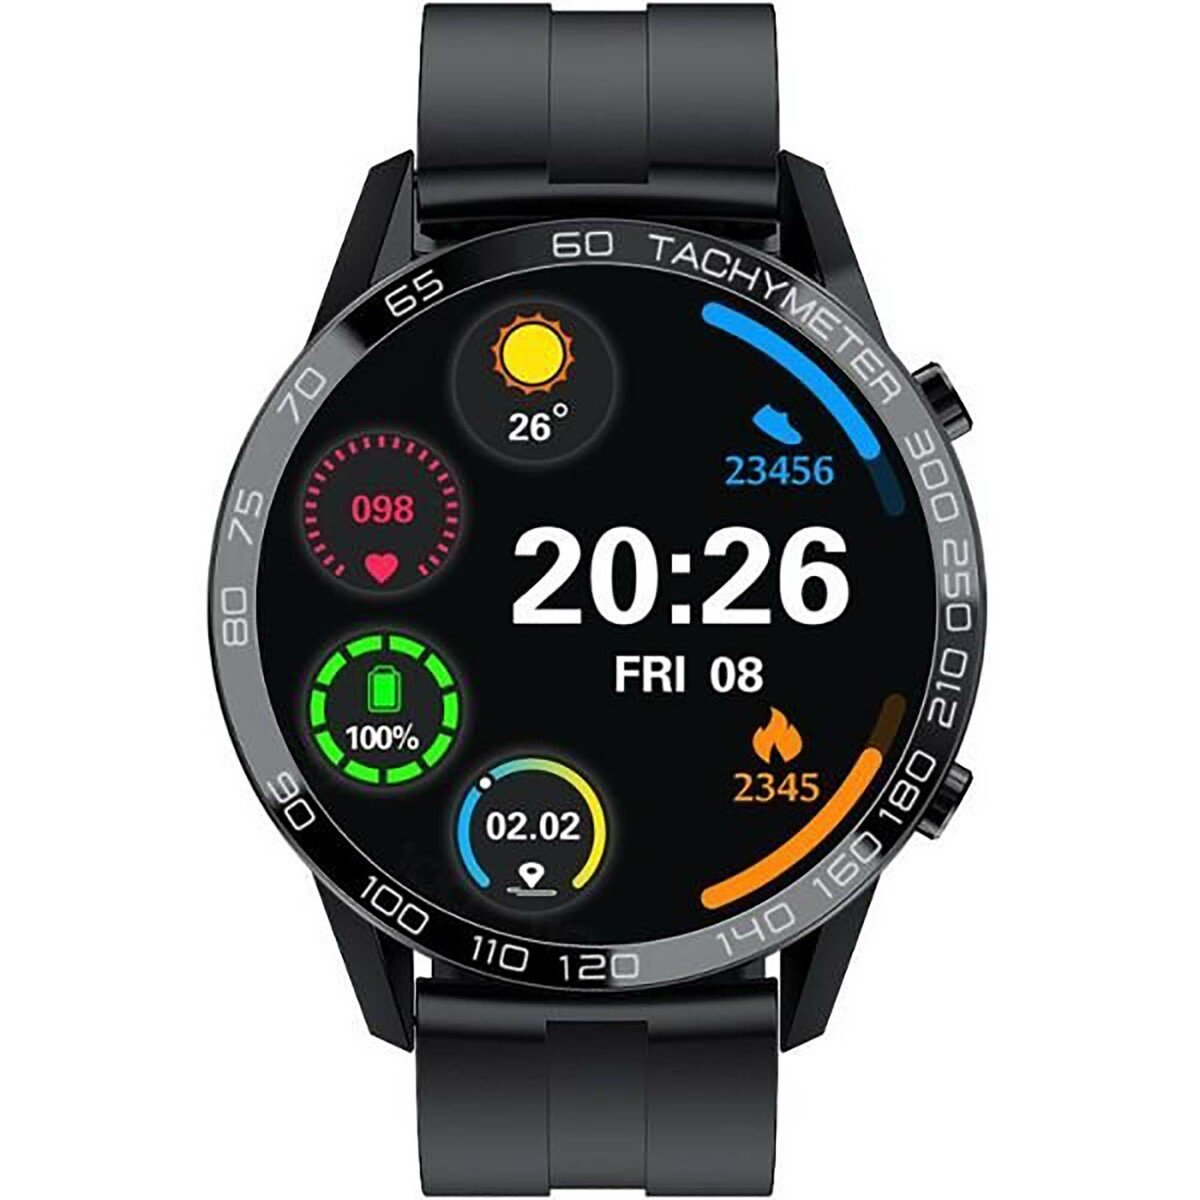 Xcell Classic-3Talk Smart Watch Black With Black Silicon Strap